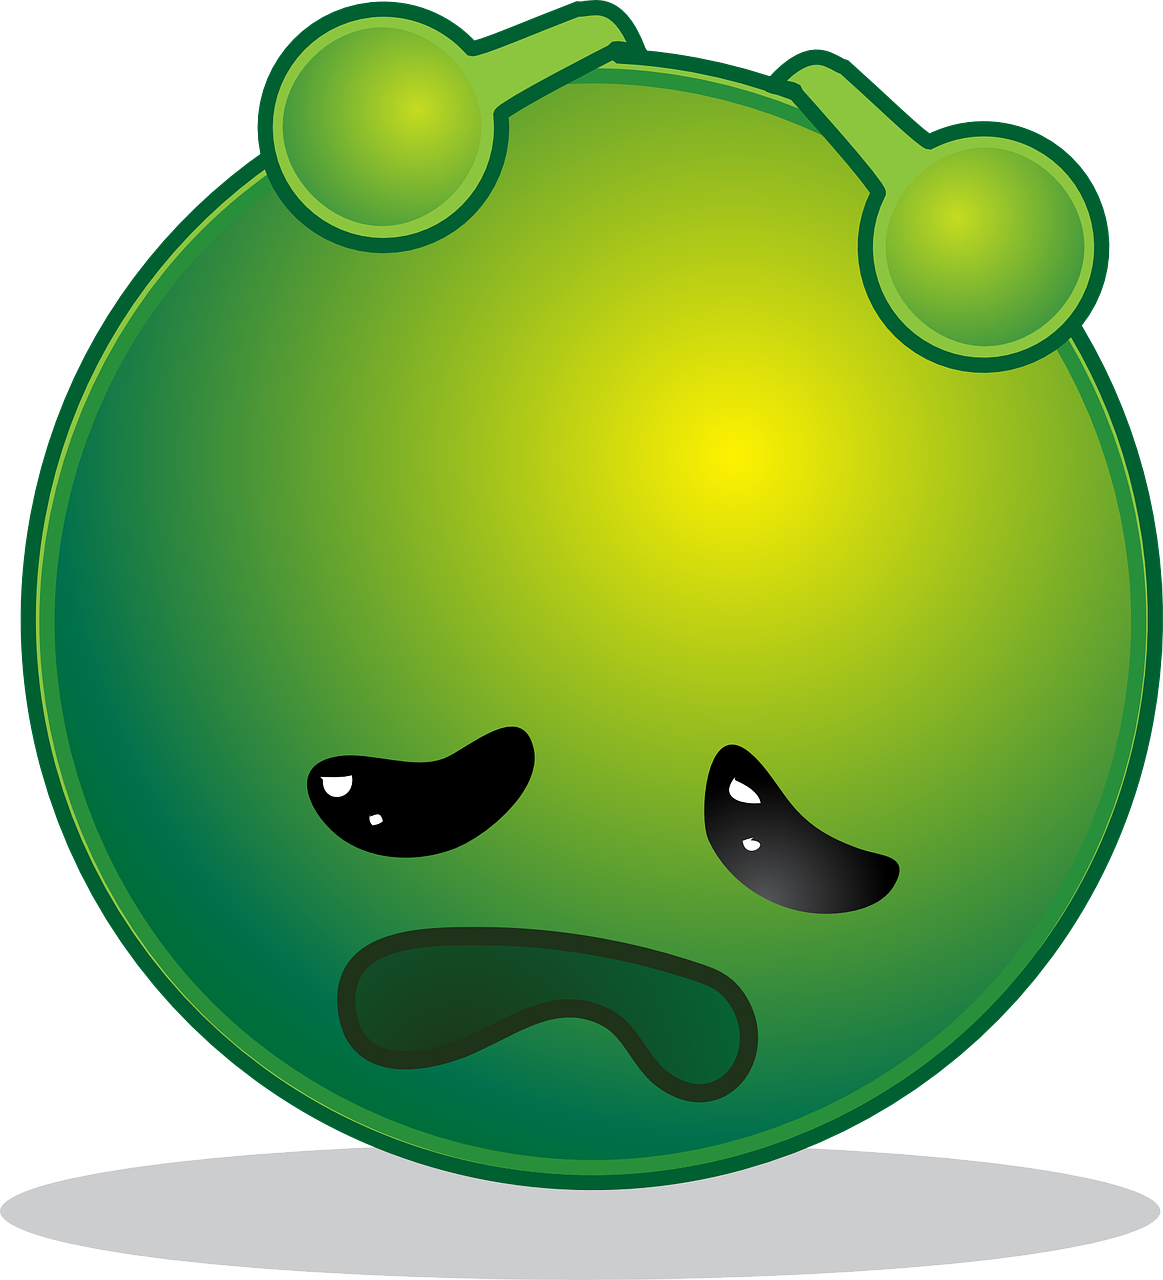 a green emo emo emo emo emo emo emo emo emo emo emo emo emo, a digital rendering, inspired by Heinz Anger, mingei, such as bacteria, sad kawaii face, cute coronavirus creatures!, with a round face